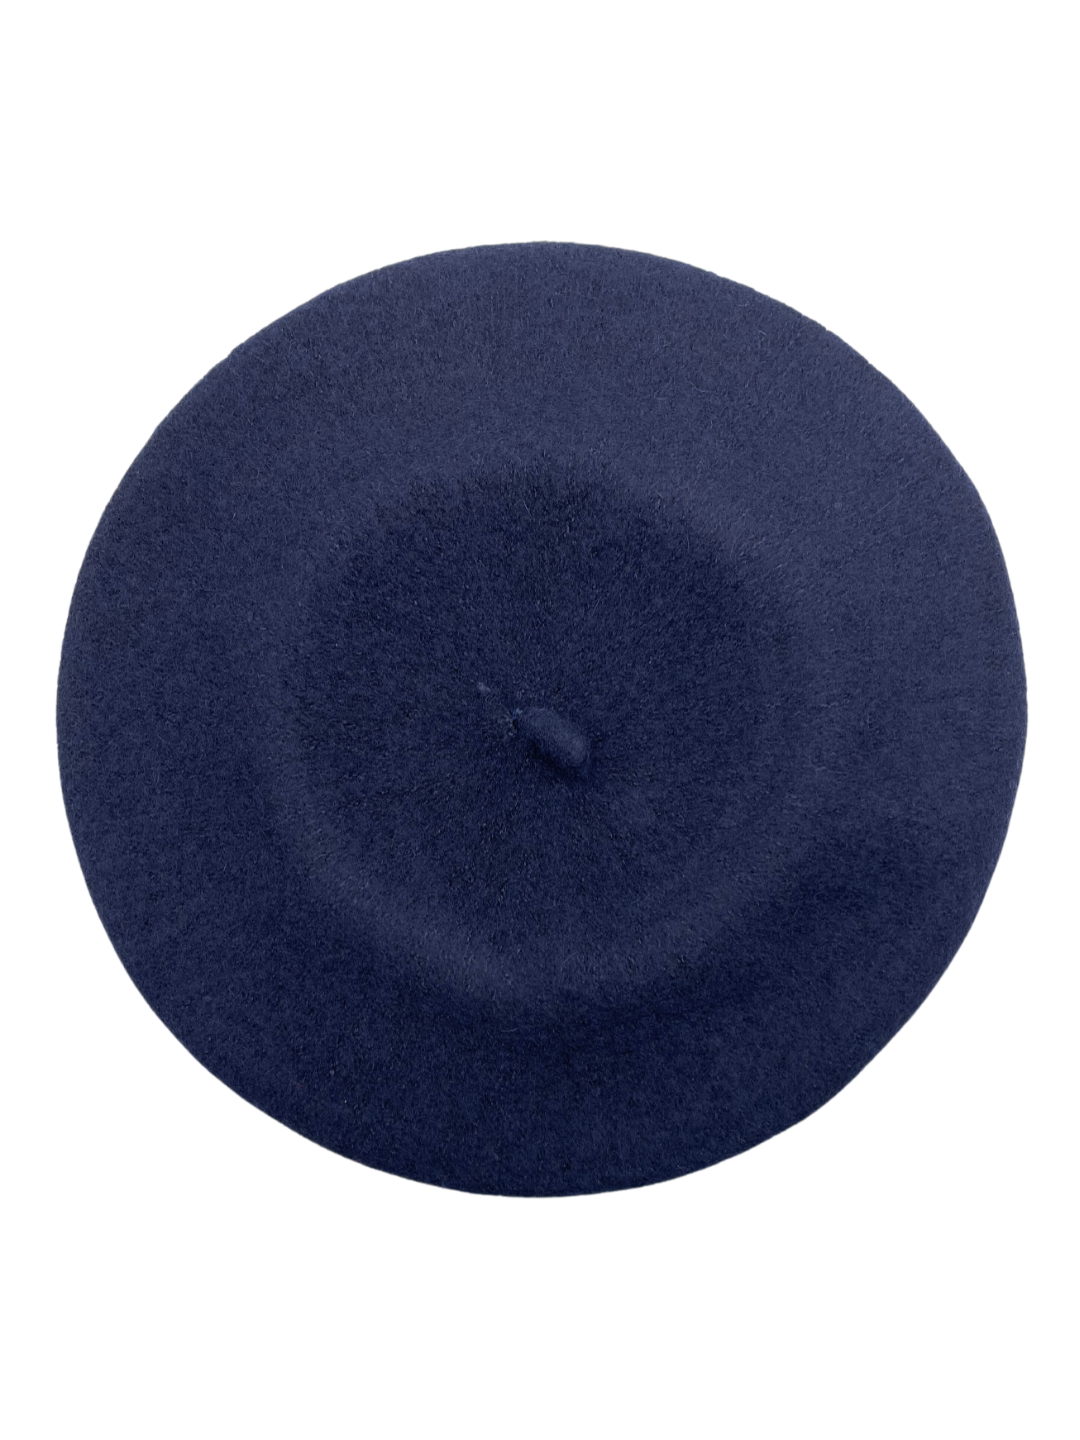 Anais French Beret - Navy